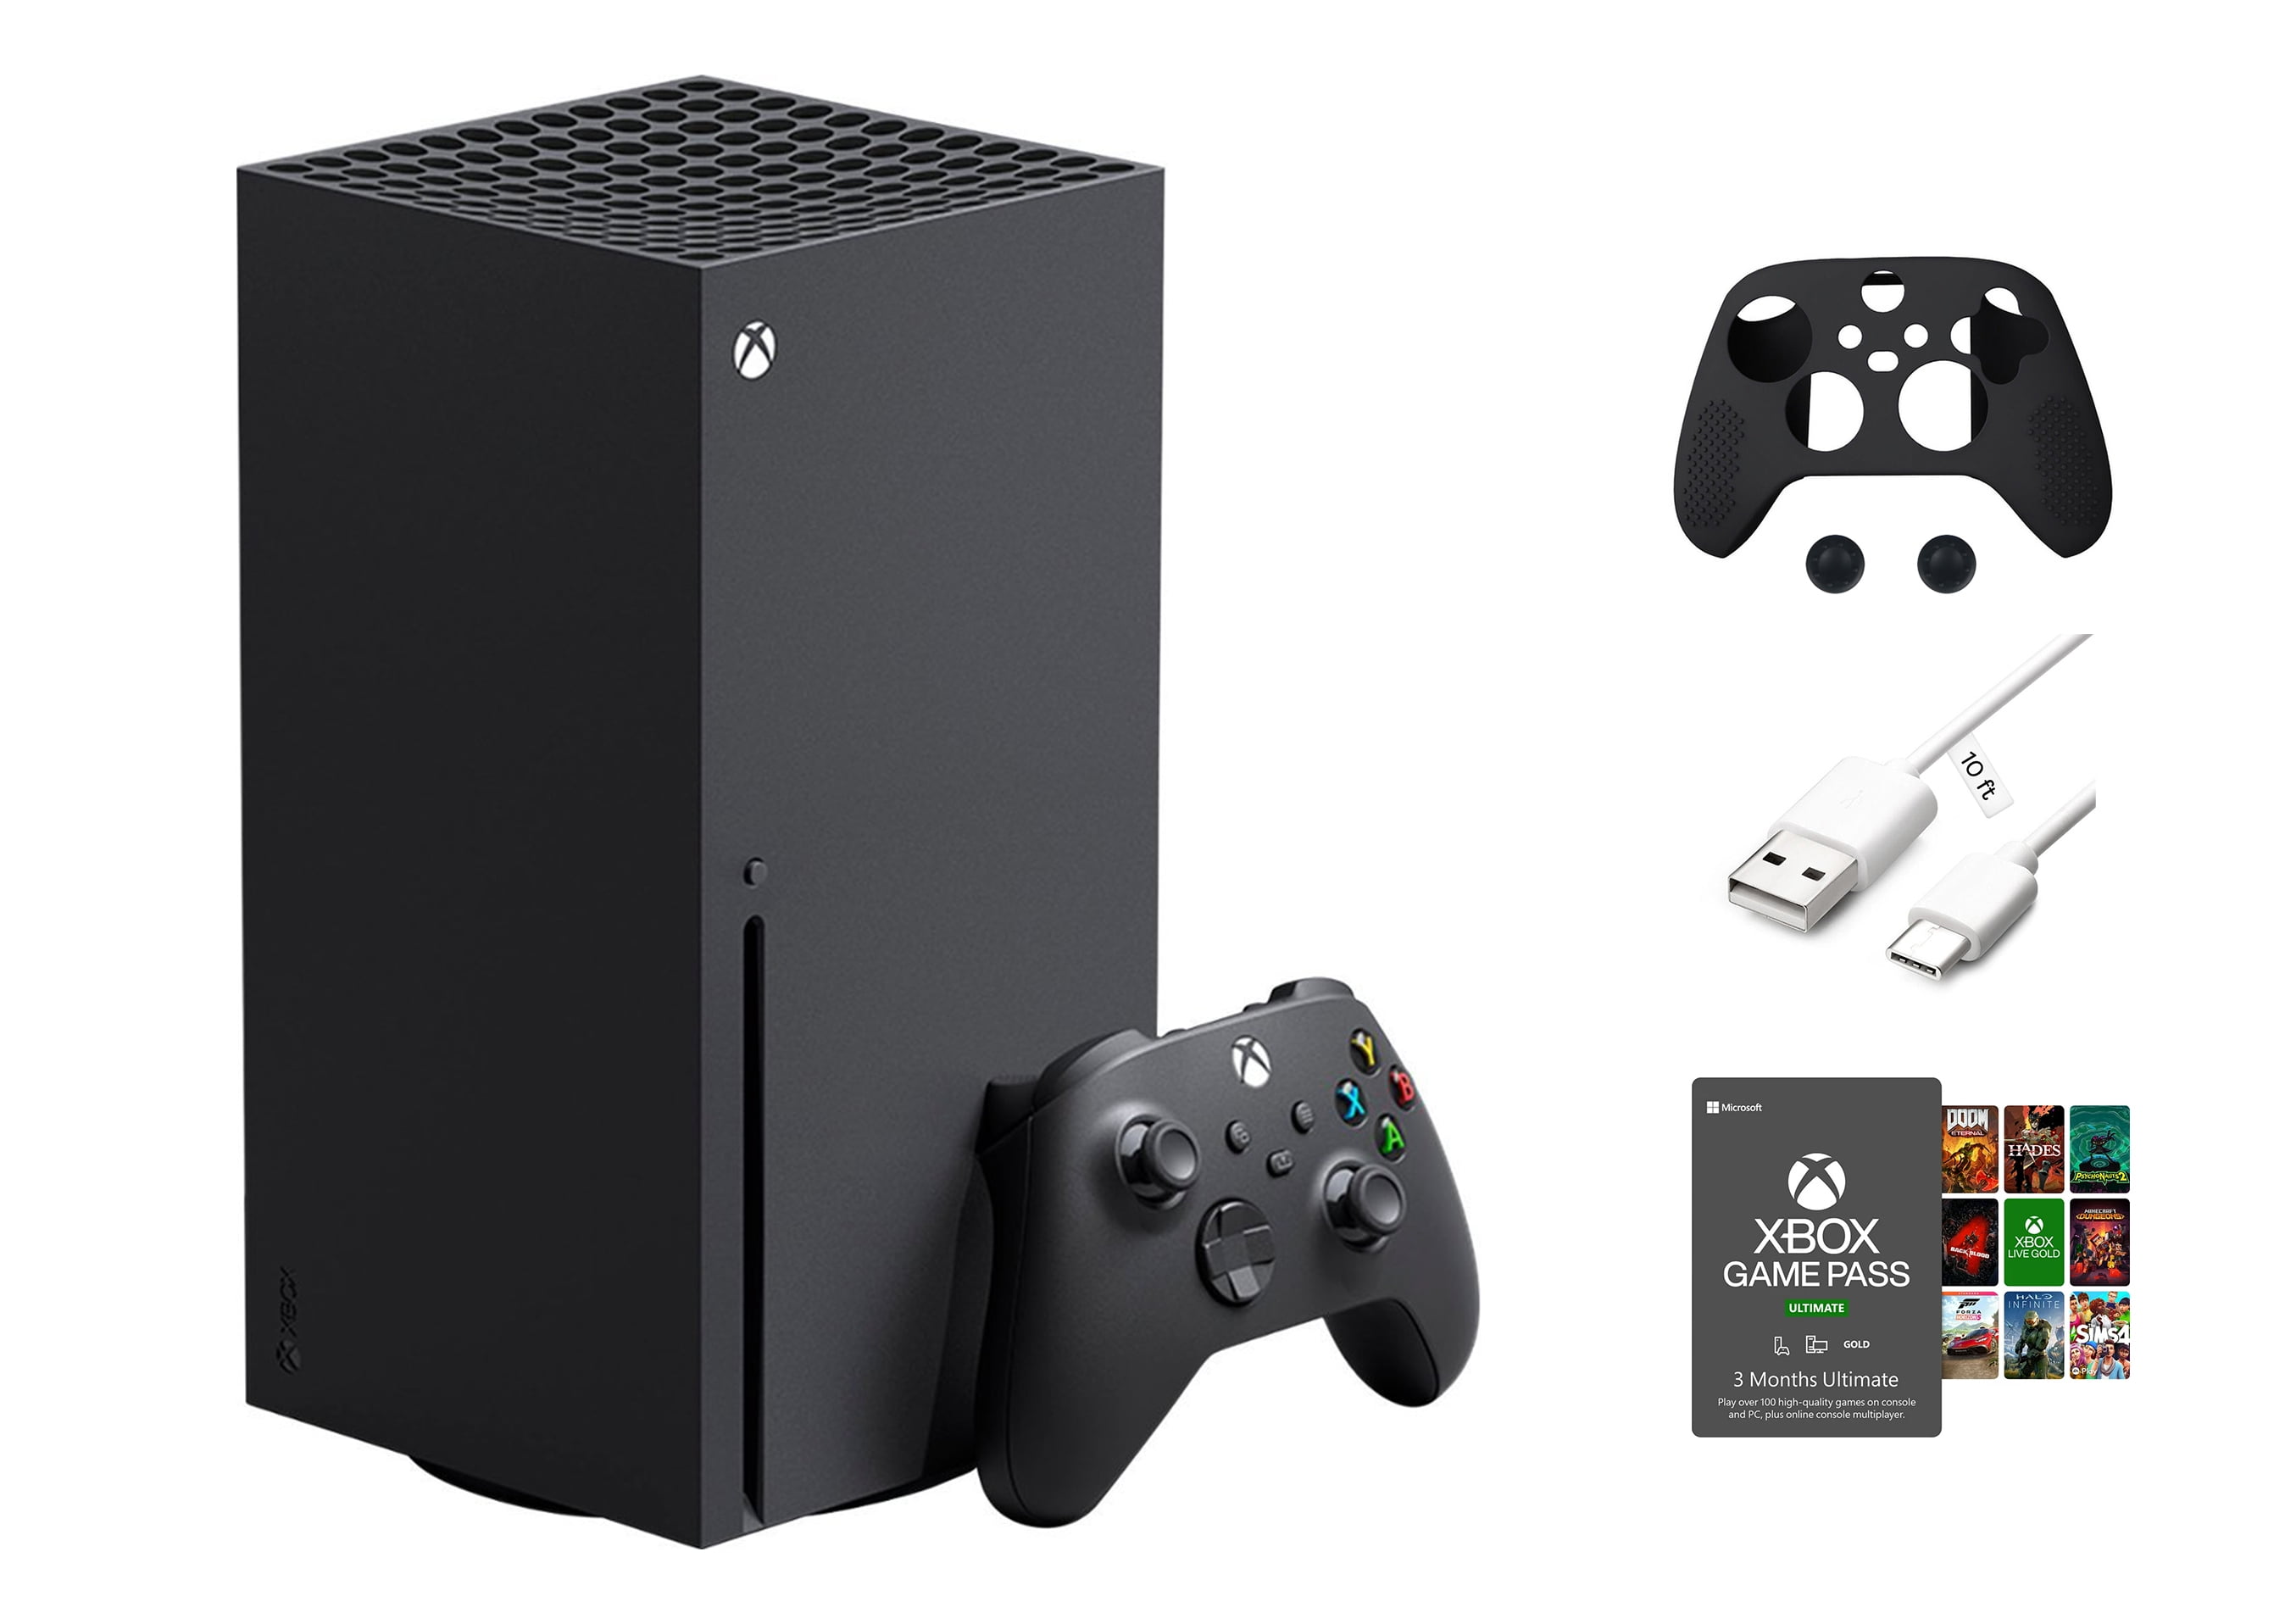 Back in Black, Xbox Series S is Now Available with a 1TB SSD